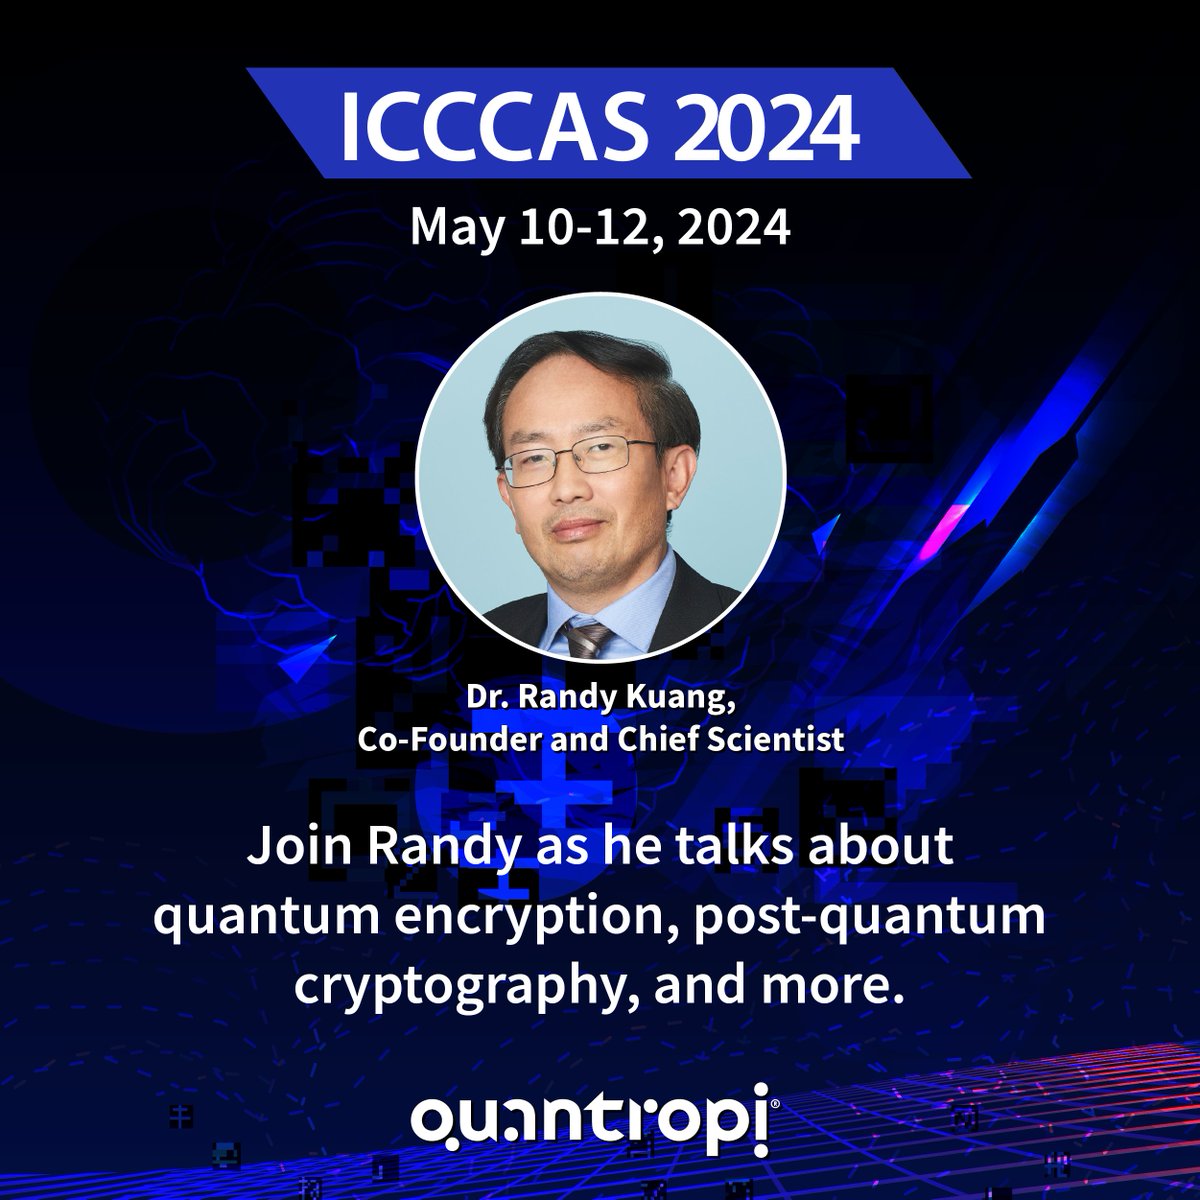 We’re excited to announce that @Quantropi's Co-Founder and Chief Scientist Dr. Randy Kuang is an invited speaker at #ICCCAS2024. Register now to attend in-person or online: hubs.li/Q02wGG7p0